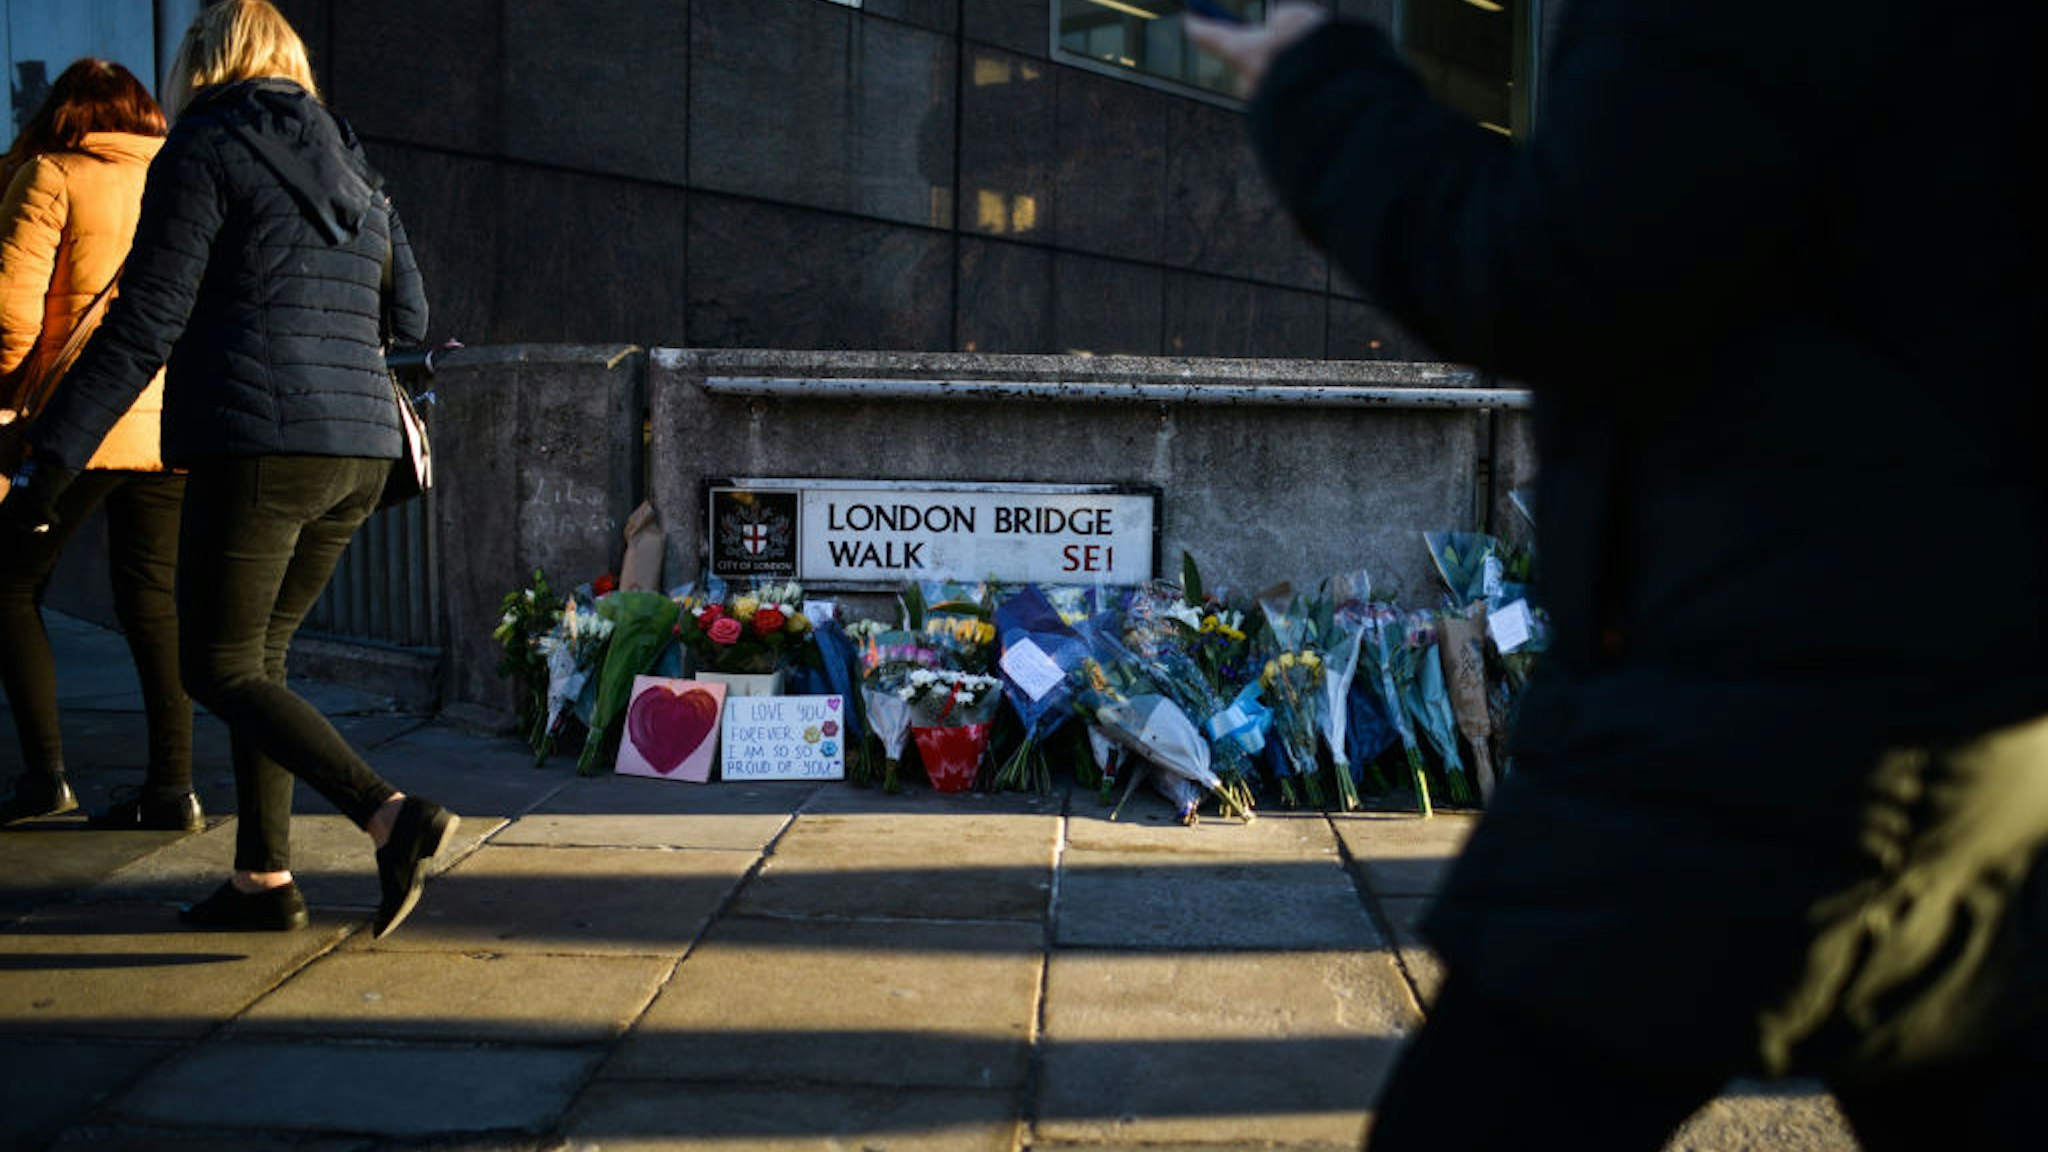 Floral tributes are left for Jack Merritt and Saskia Jones, who were killed in a terror attack, on December 2, 2019 in London, England. Usman Khan, a 28 year old former prisoner convicted of terrorism offences, killed two people in Fishmongers' Hall at the North end of London Bridge on Friday, November 29, before continuing his attack on the bridge. Mr Khan was restrained and disarmed by members of the public before being shot by armed police.